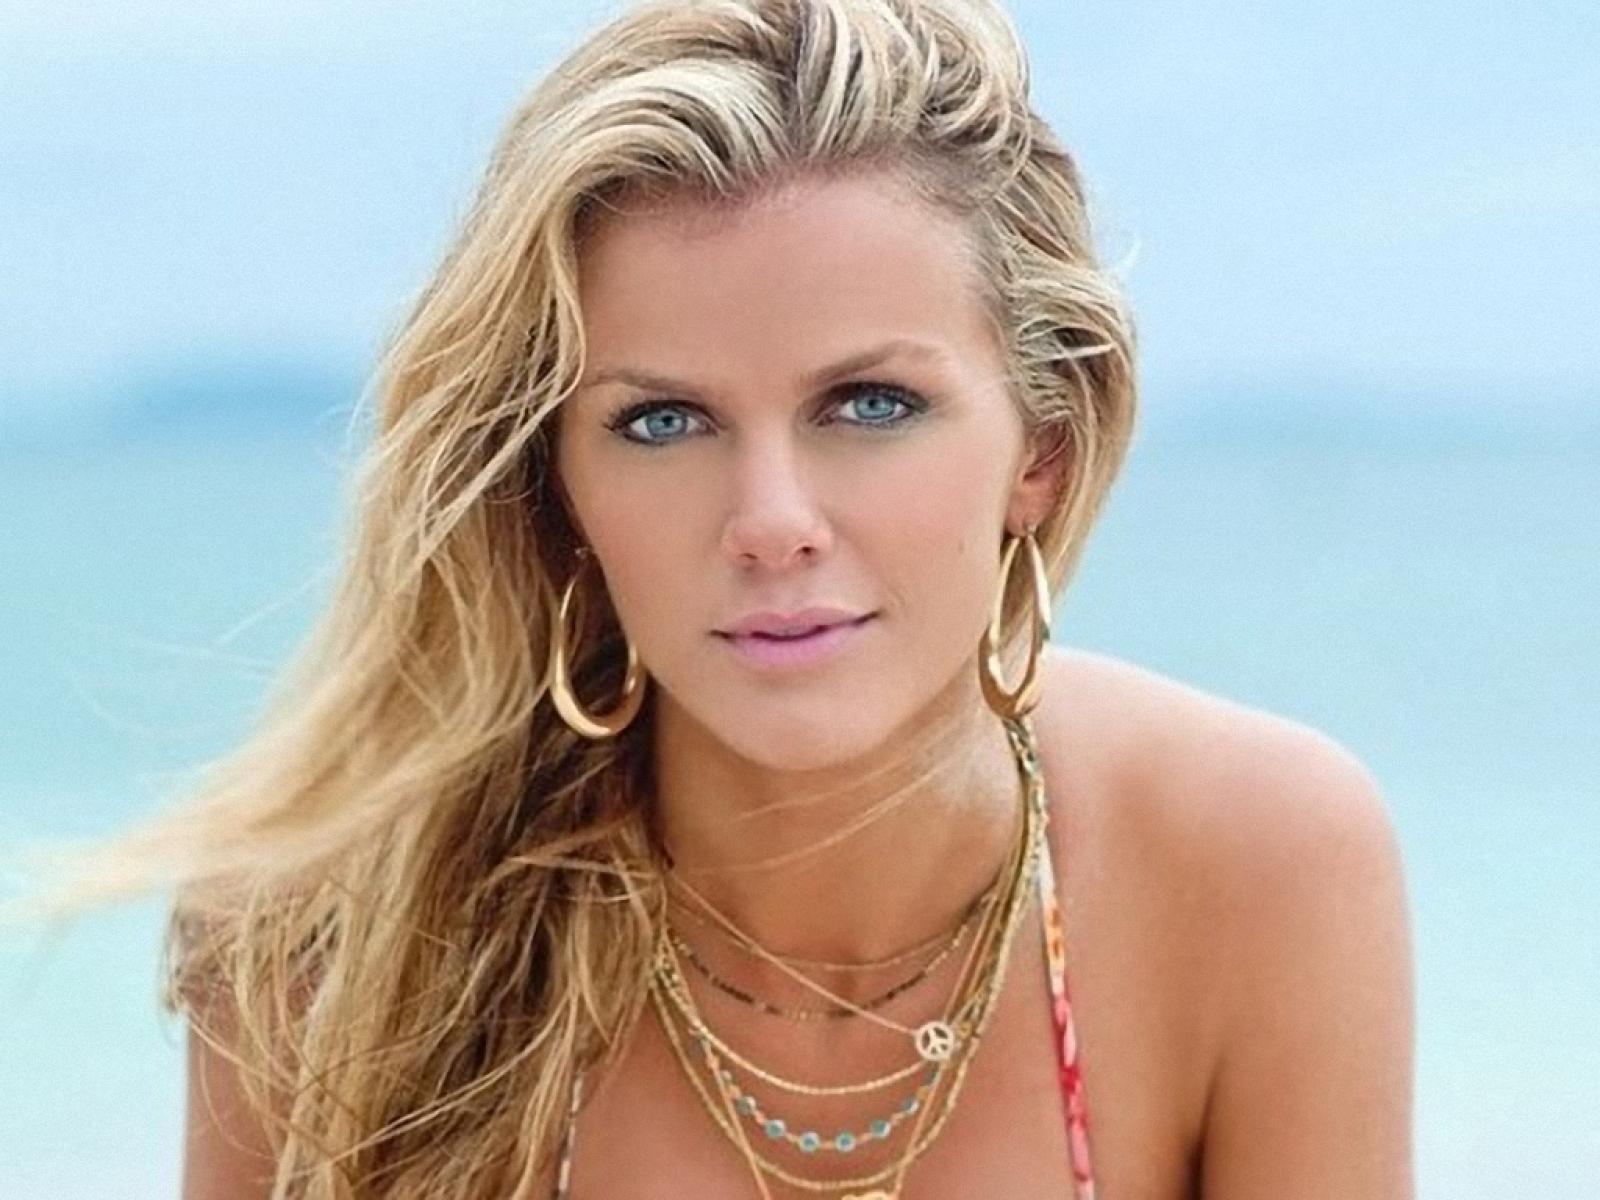 Brooklyn Decker Knows The Deck Is Stacked Against Her Gaming